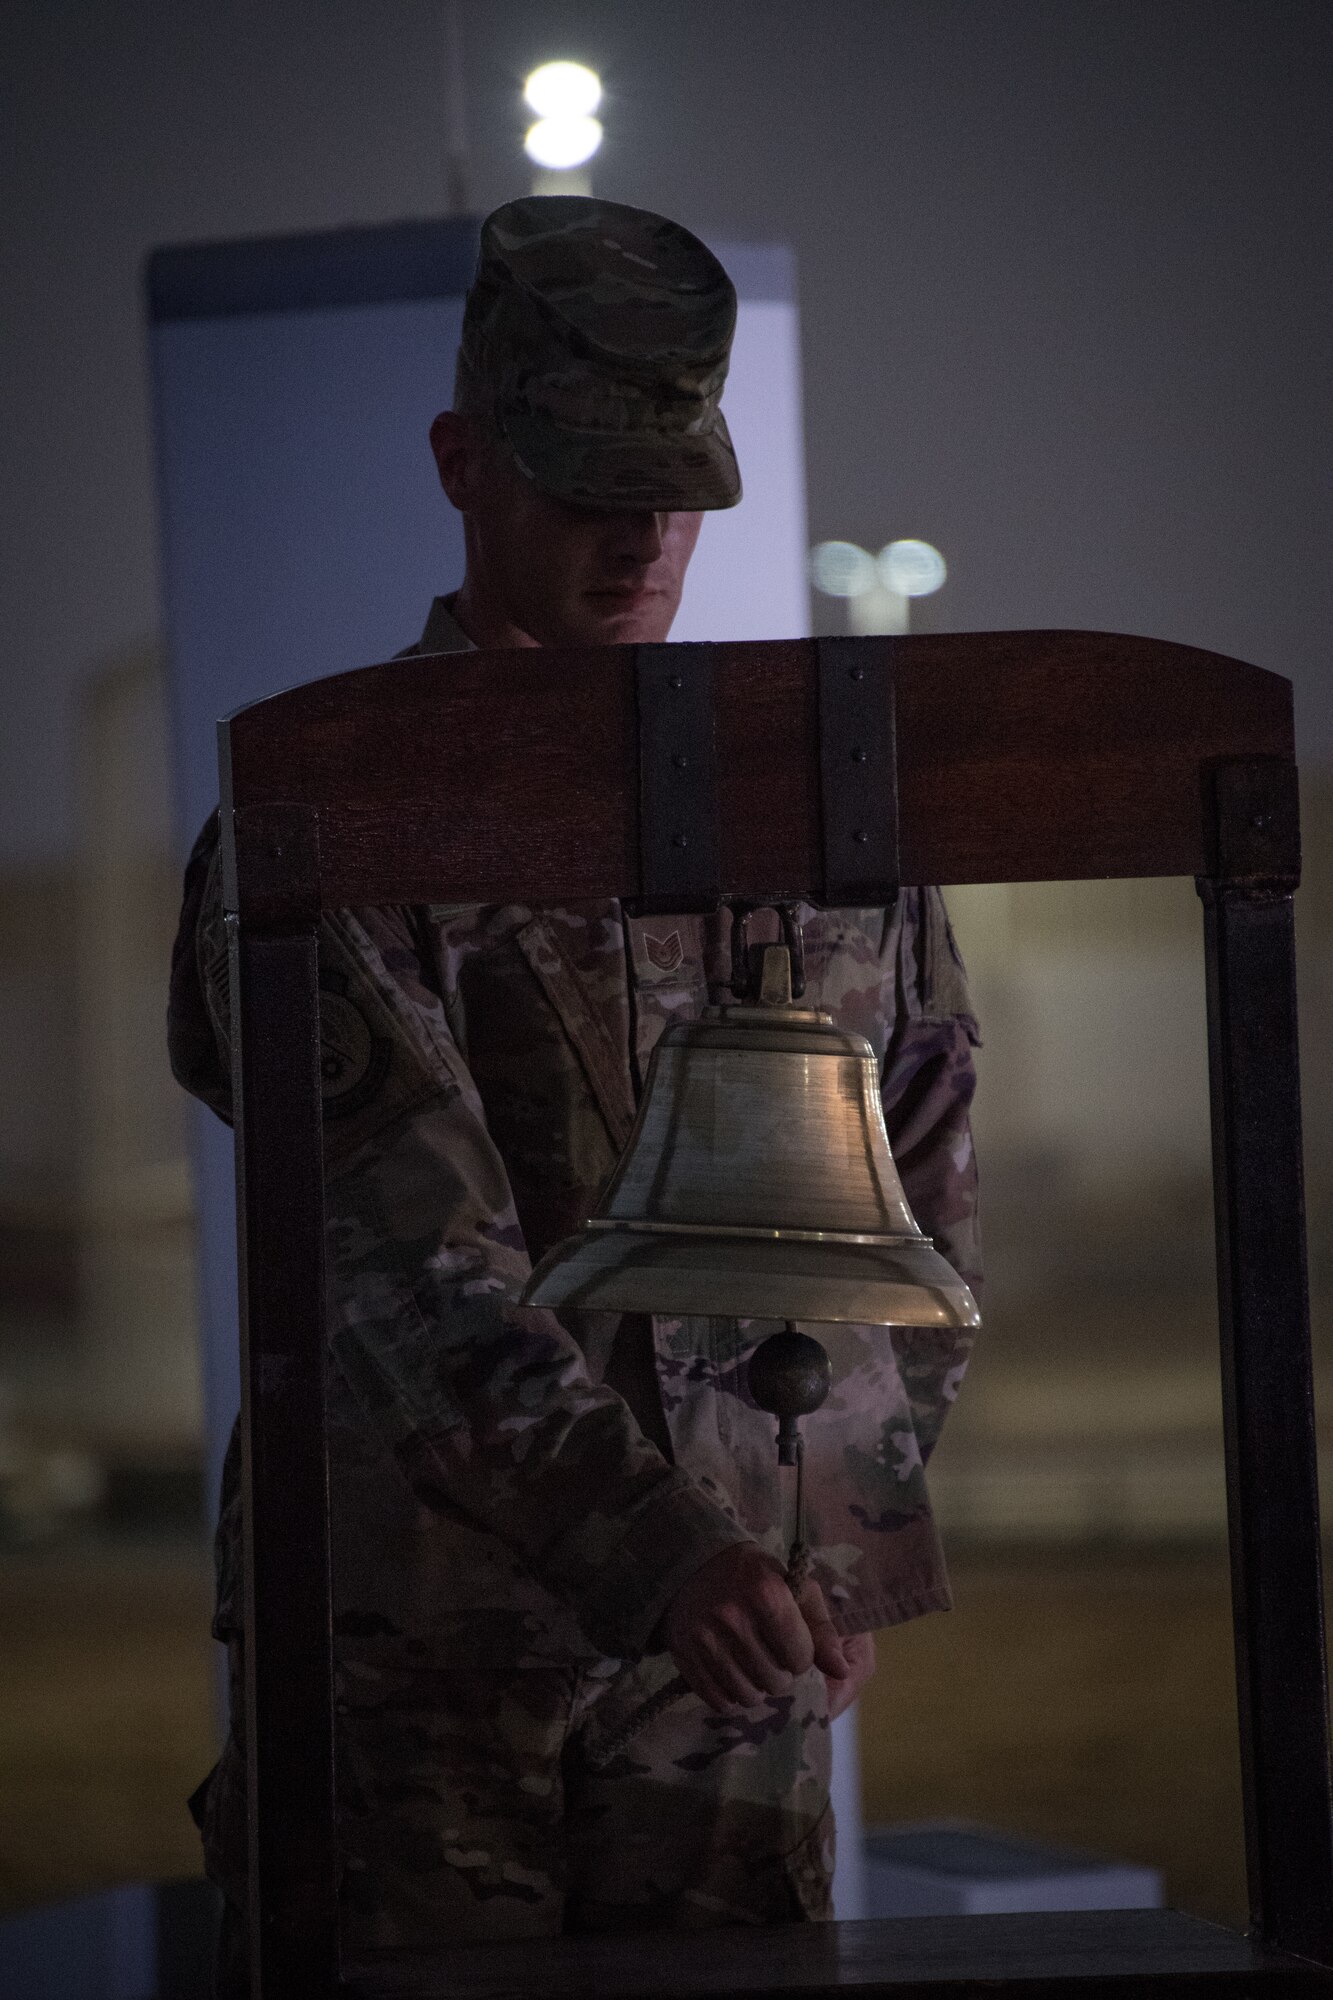 U.S. Air Force Tech. Sgt. Joshua Miles rings a ceremonious bell honoring the first responders who died during the attack 17 years ago on the World Trade Center, Al Dhafra Air Base, United Arab Emirates. Sept. 11, 2018.  (U.S. Air Force photo by Tech. Sgt. Nieko Carzis)